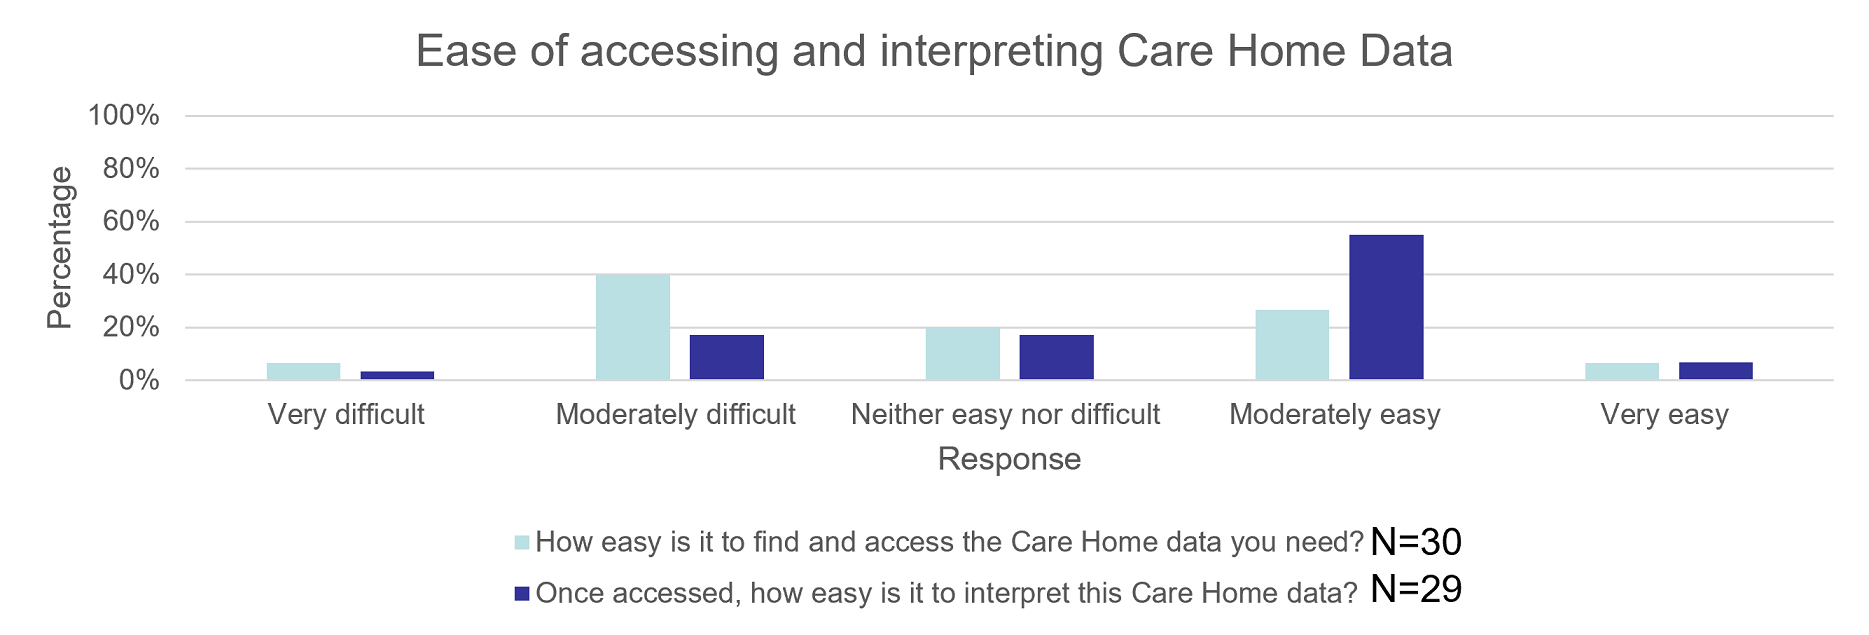 This chart shows the ease of accessing and interpreting care home data. The light blue columns display responses on how easy it was to access the data. The dark blue columns display responses on how easy it was to interpret the Care Home data once accessed.